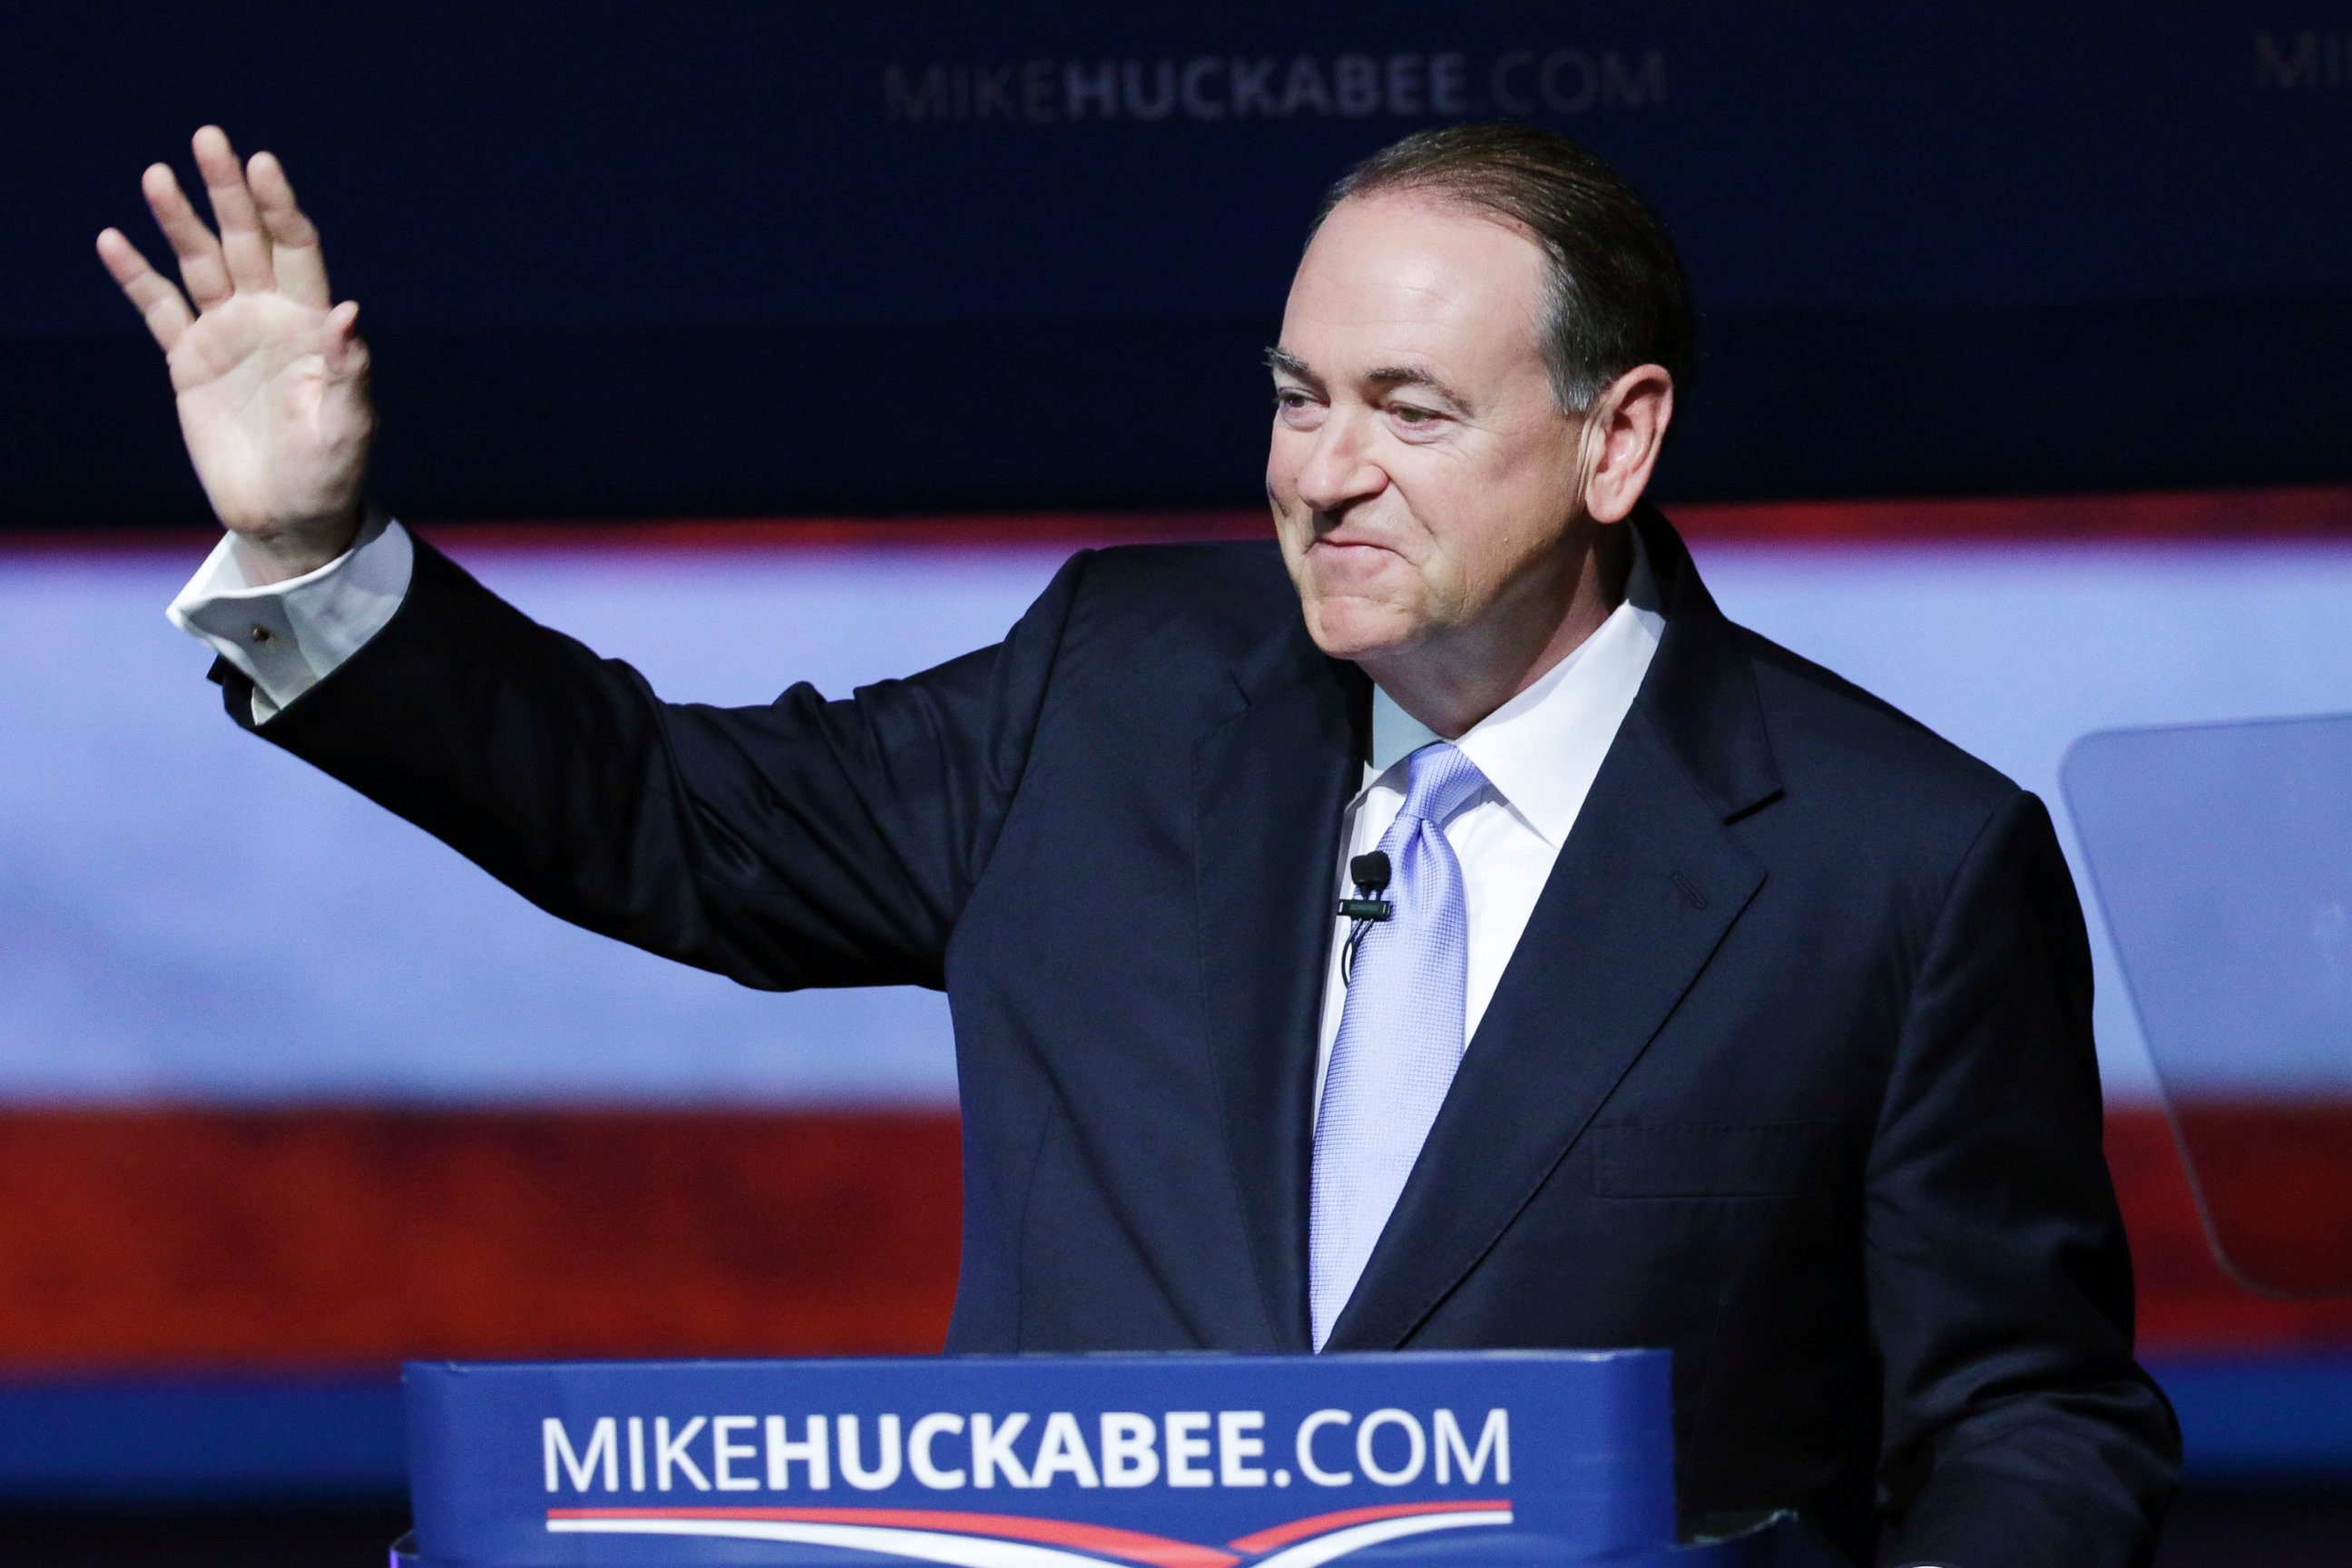 PHOTO: Former Arkansas Gov. Mike Huckabee waves to supporters in Hope, Ark., May 5, 2015, after he announced that he is running for the Republican presidential nomination.